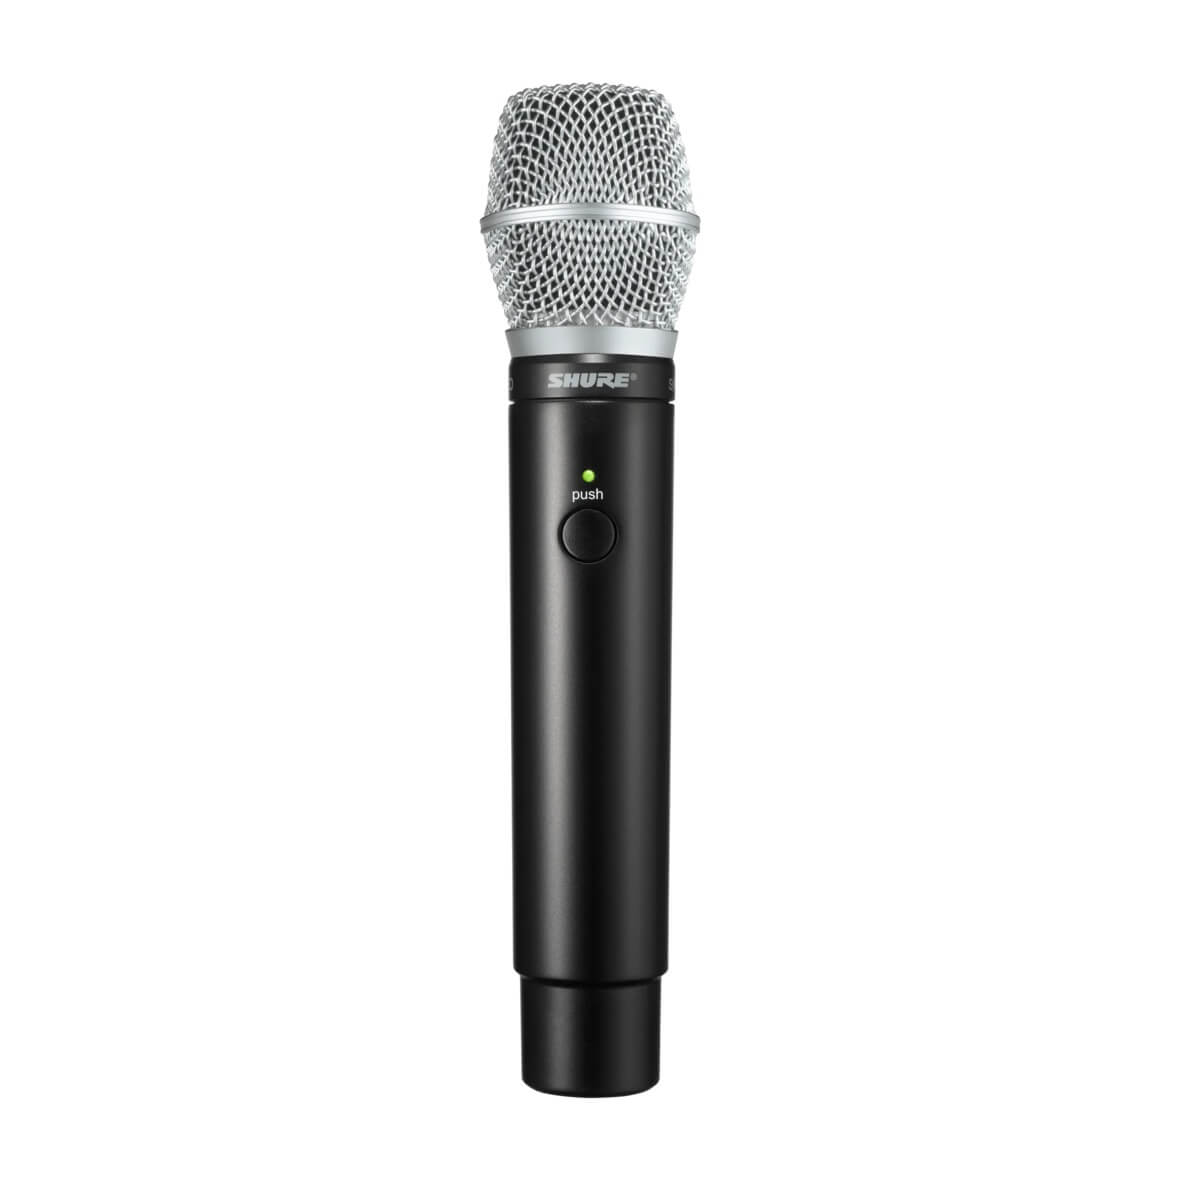 Shure MXW2/SM86 - Microflex Handheld Transmitter with SM86 Capsule